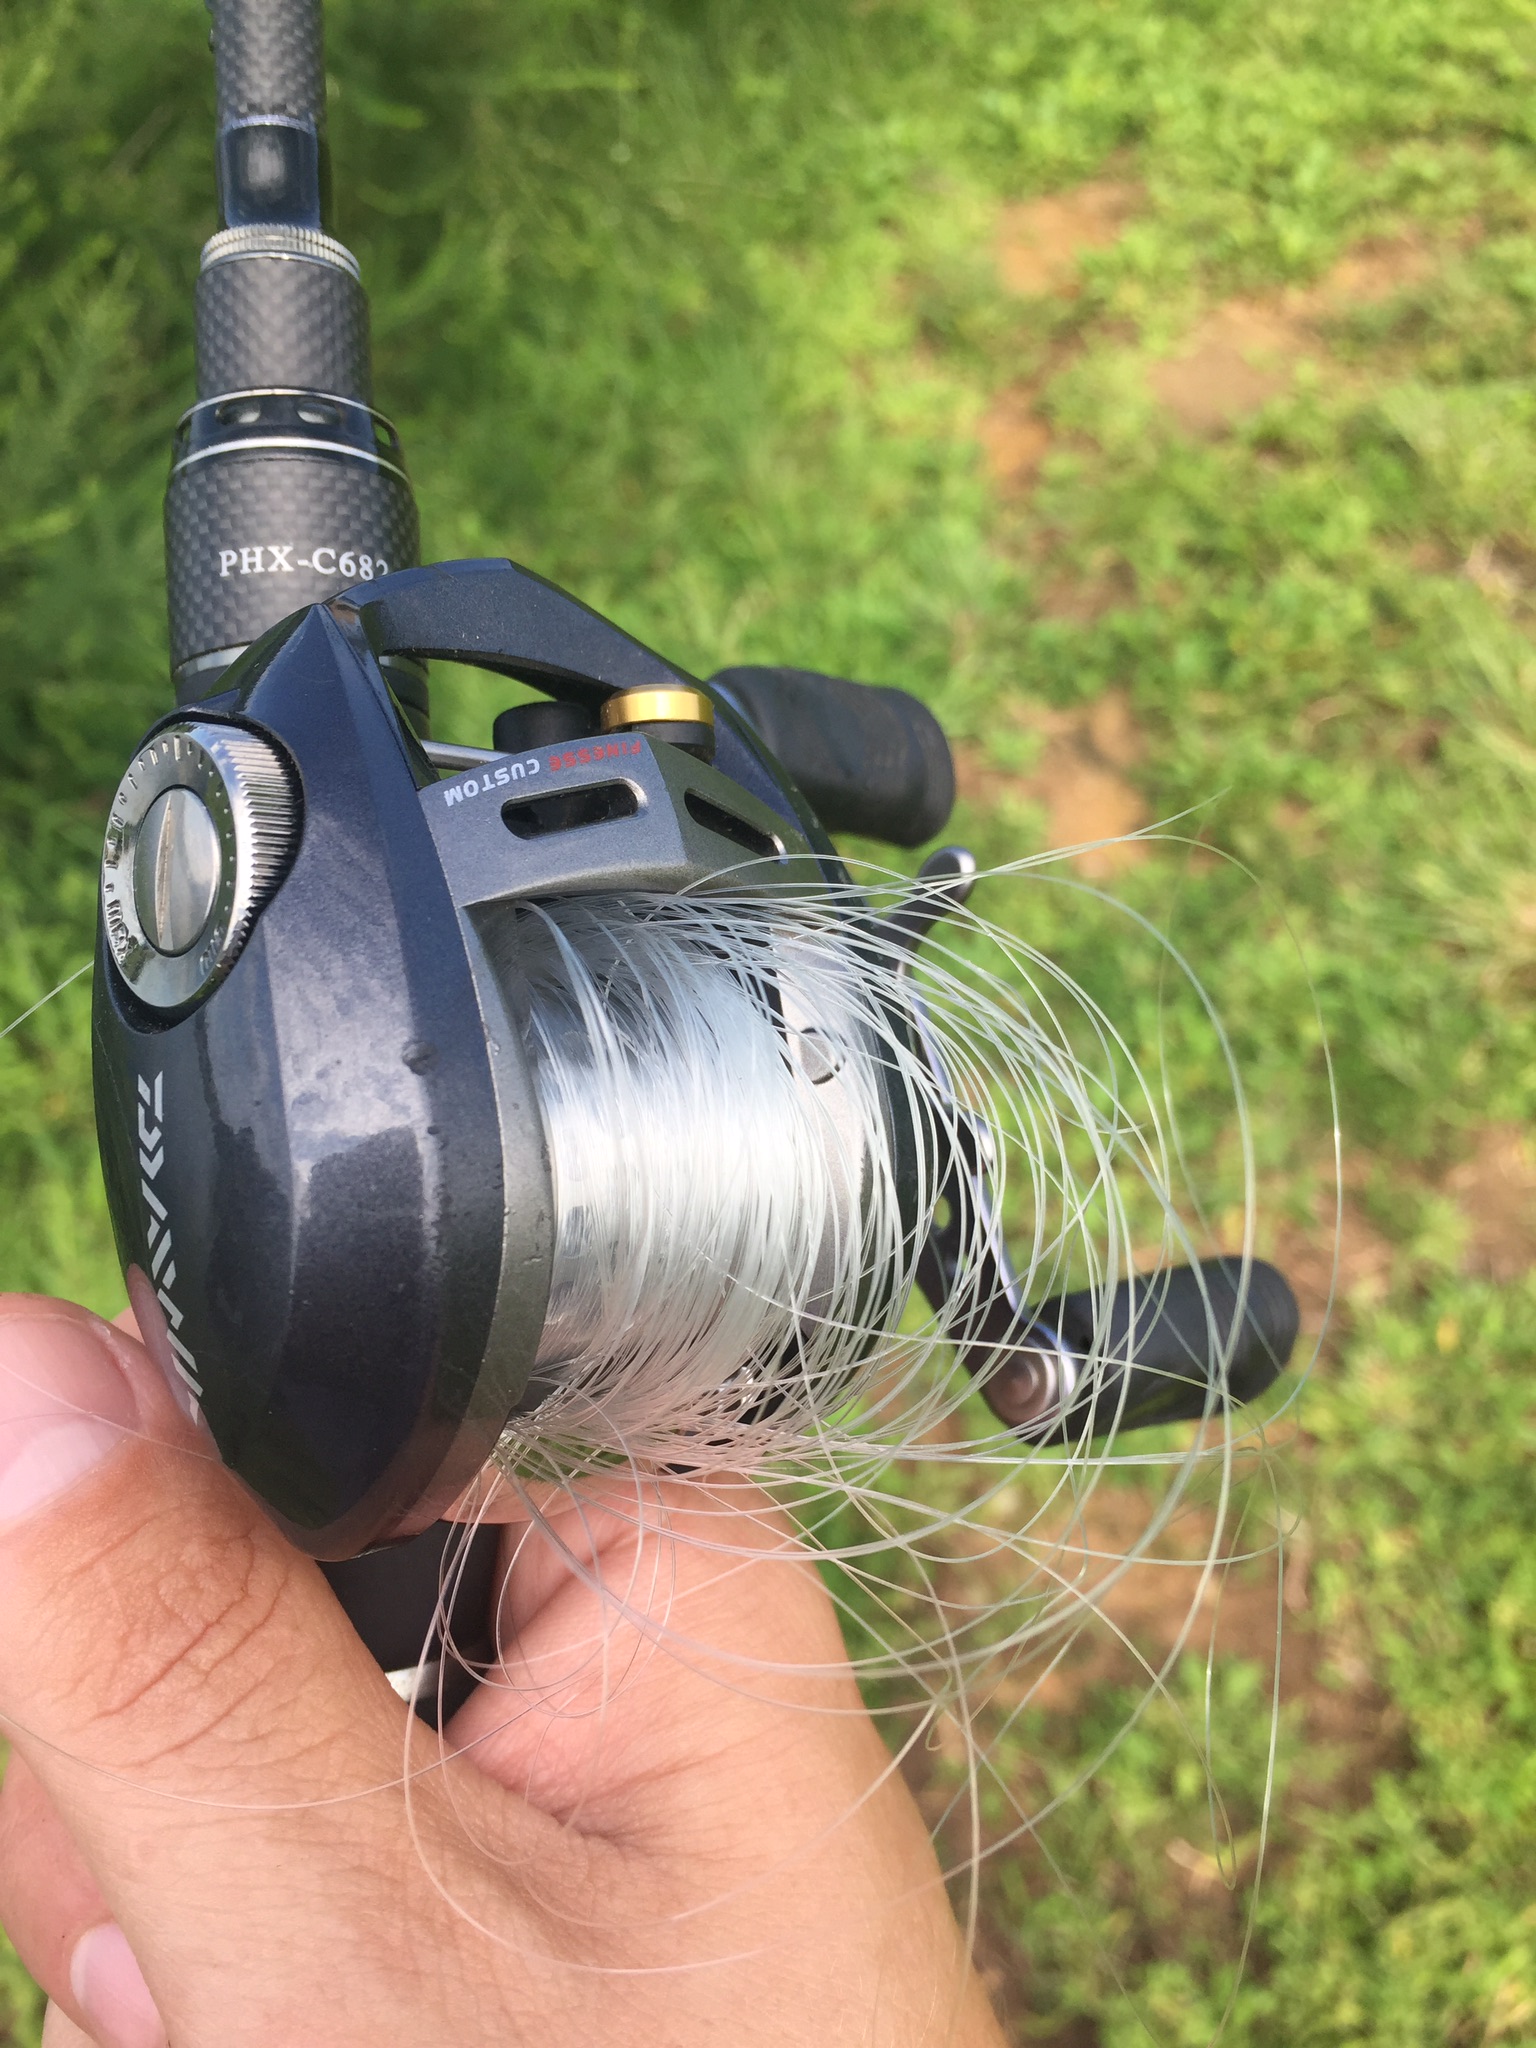 Recommendation for drop-shot Casting Reel - Fishing Rods, Reels